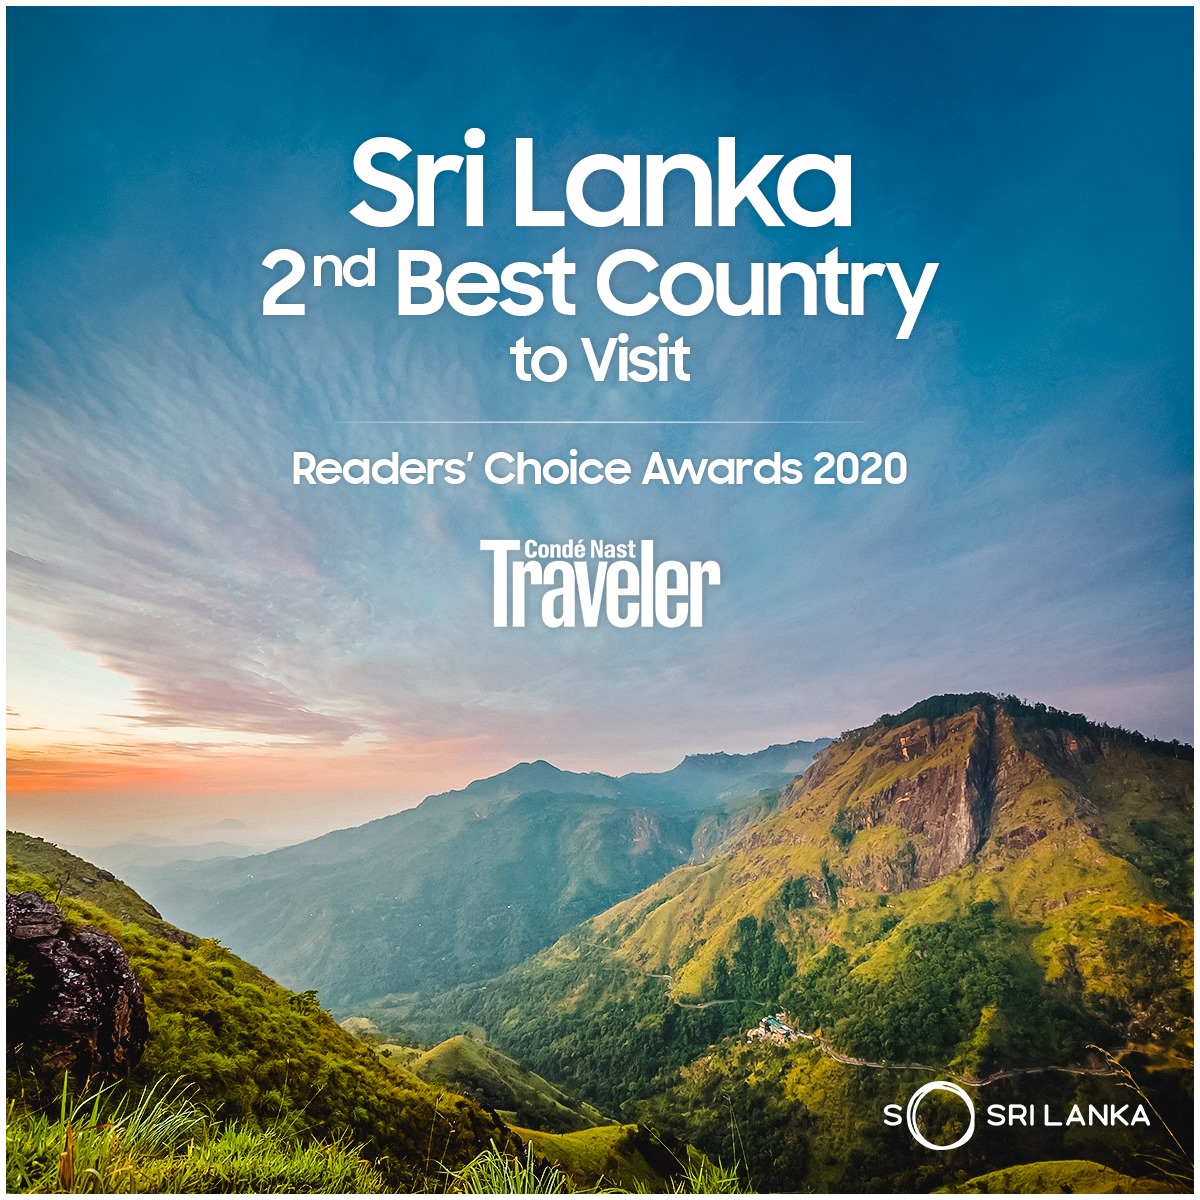 Sri Lanka was proudly placed 2nd at the Readers’ Choice Awards 2020